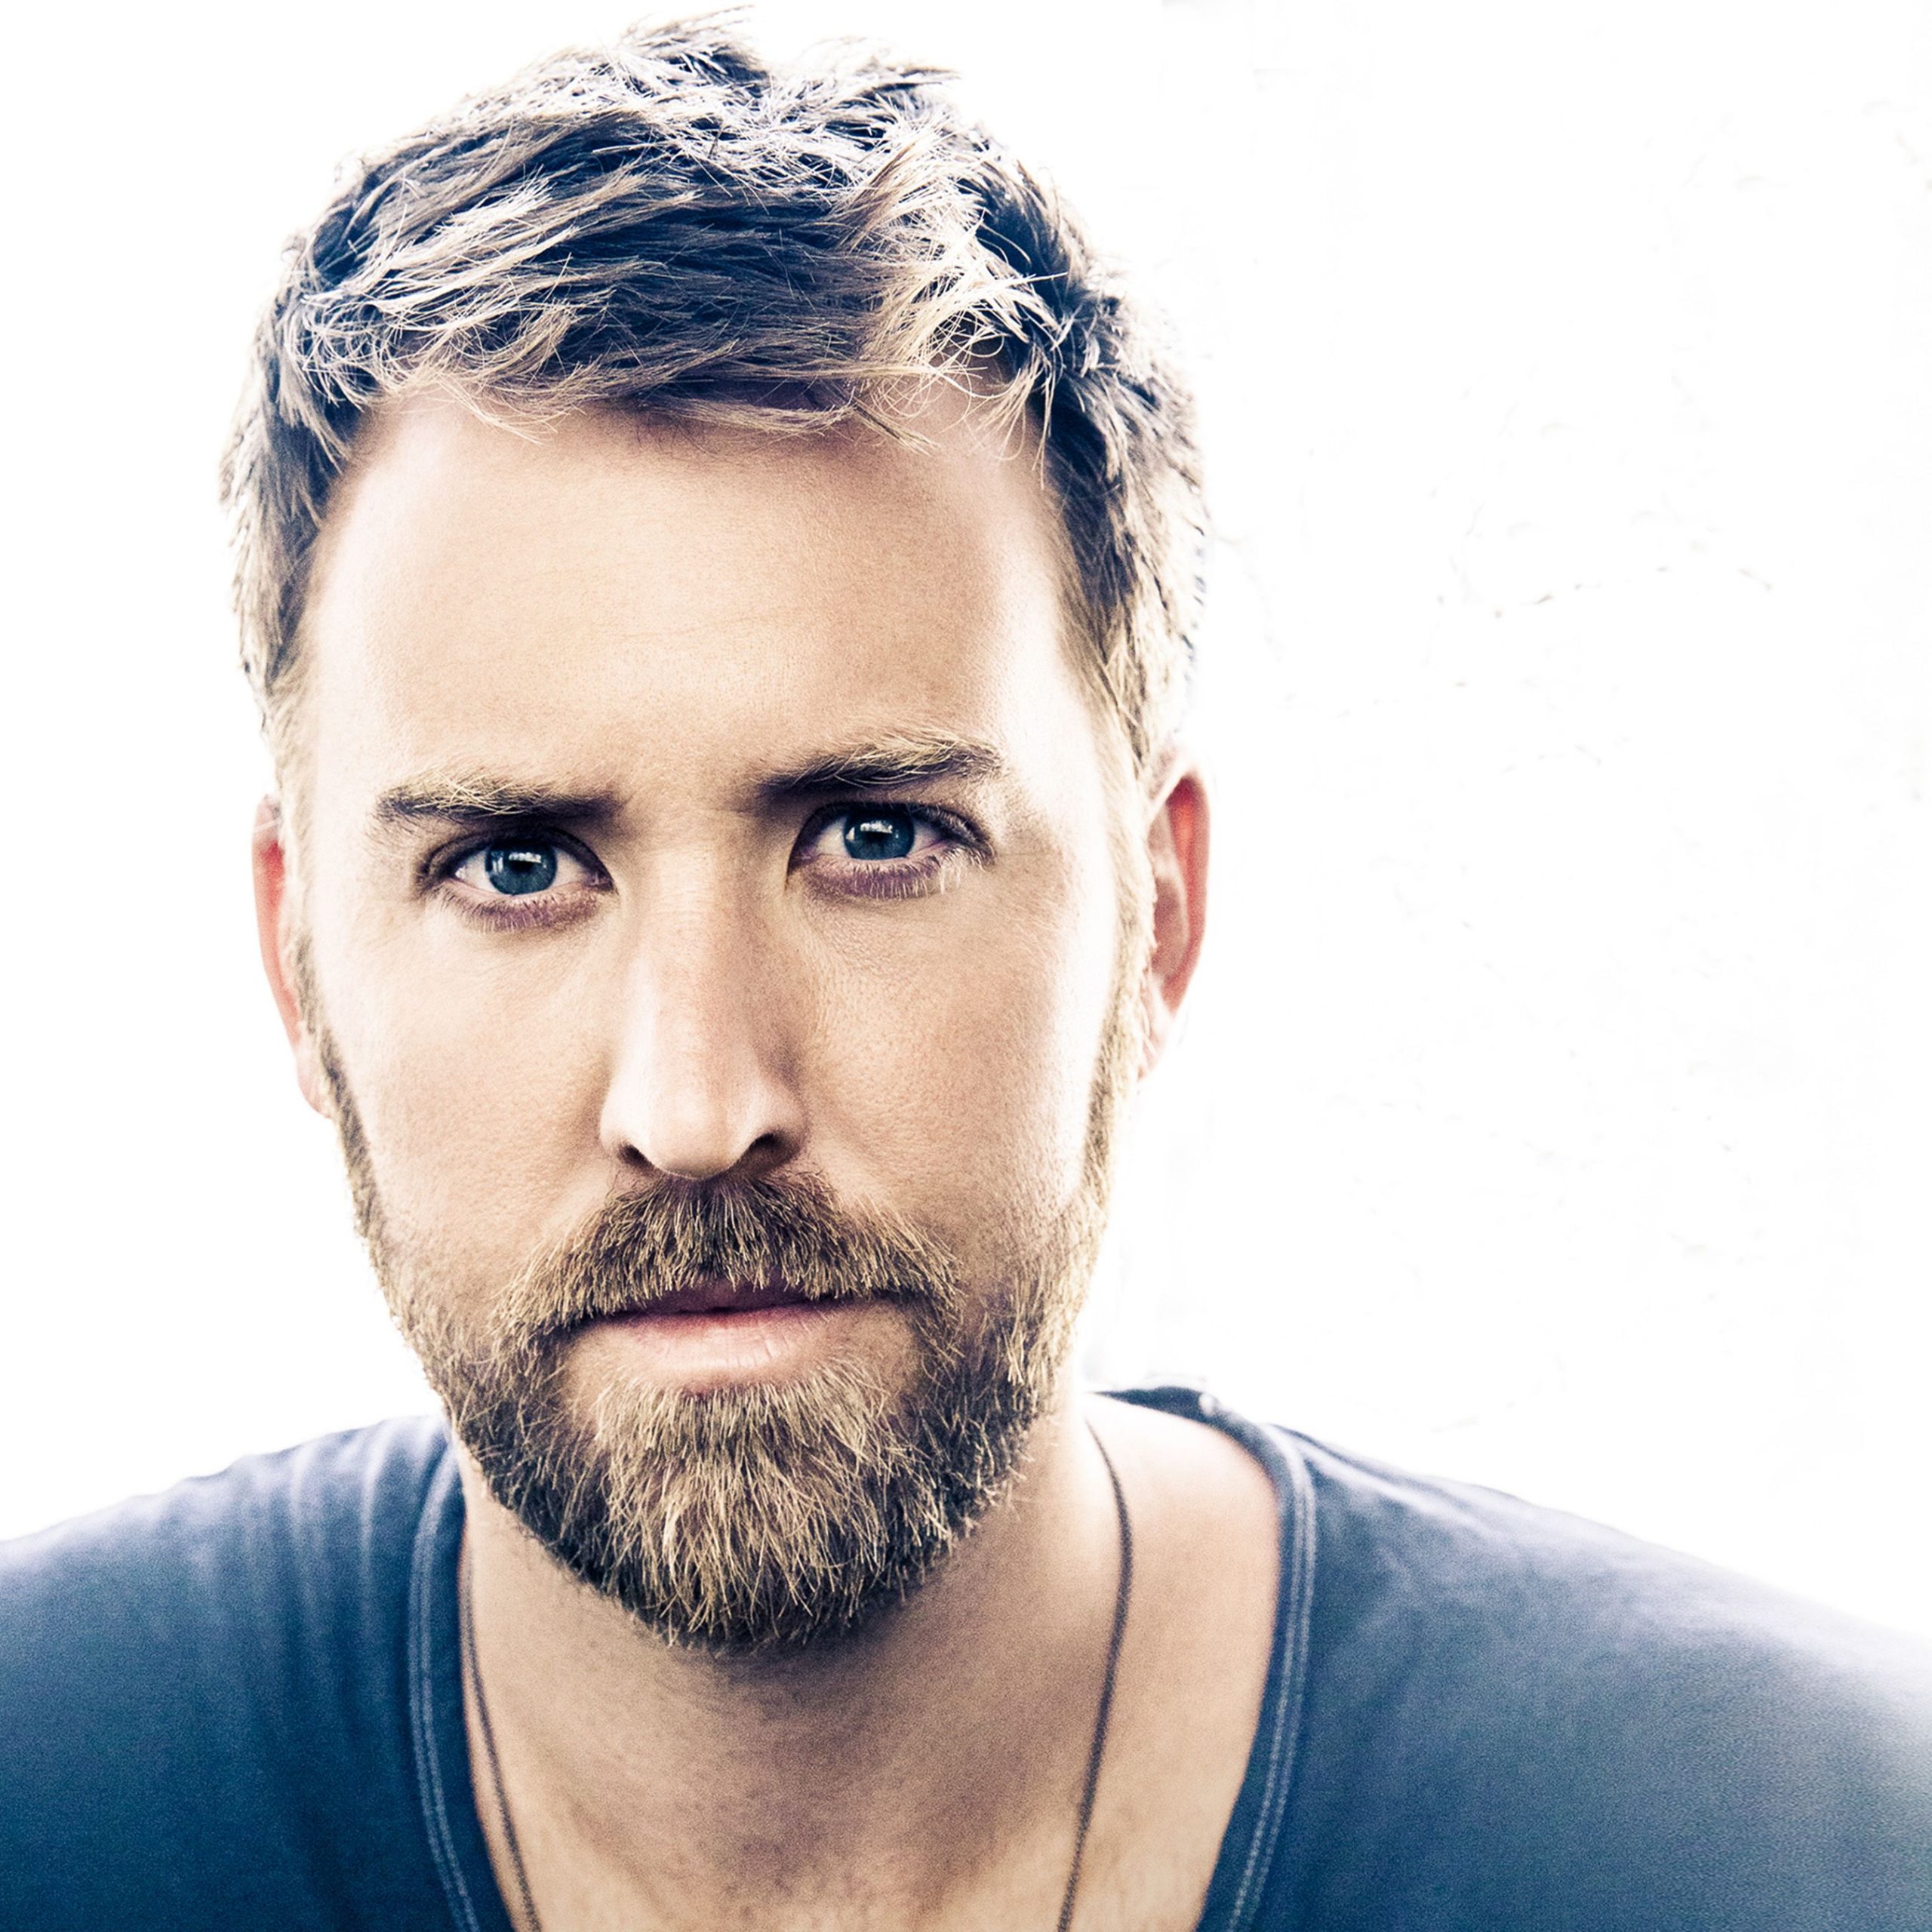 CHARLES KELLEY STEERS “THE DRIVER” TO COUNTRY RADIO